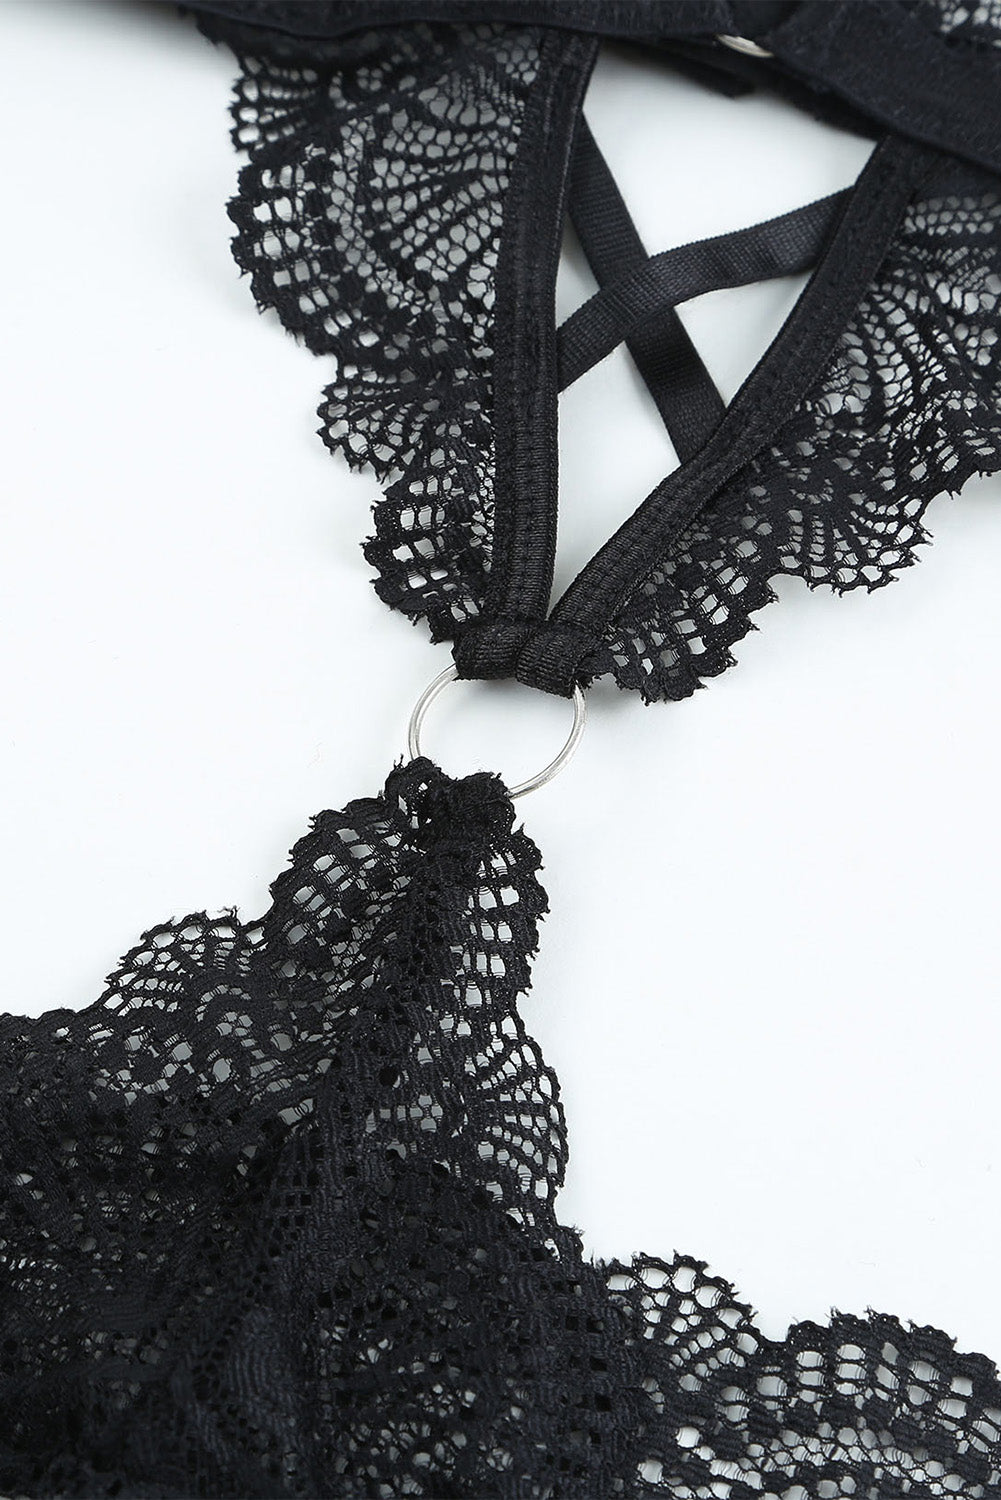 Black Circle Connected Strappy Lace Teddy Lingerie Teddy Lingerie JT's Designer Fashion